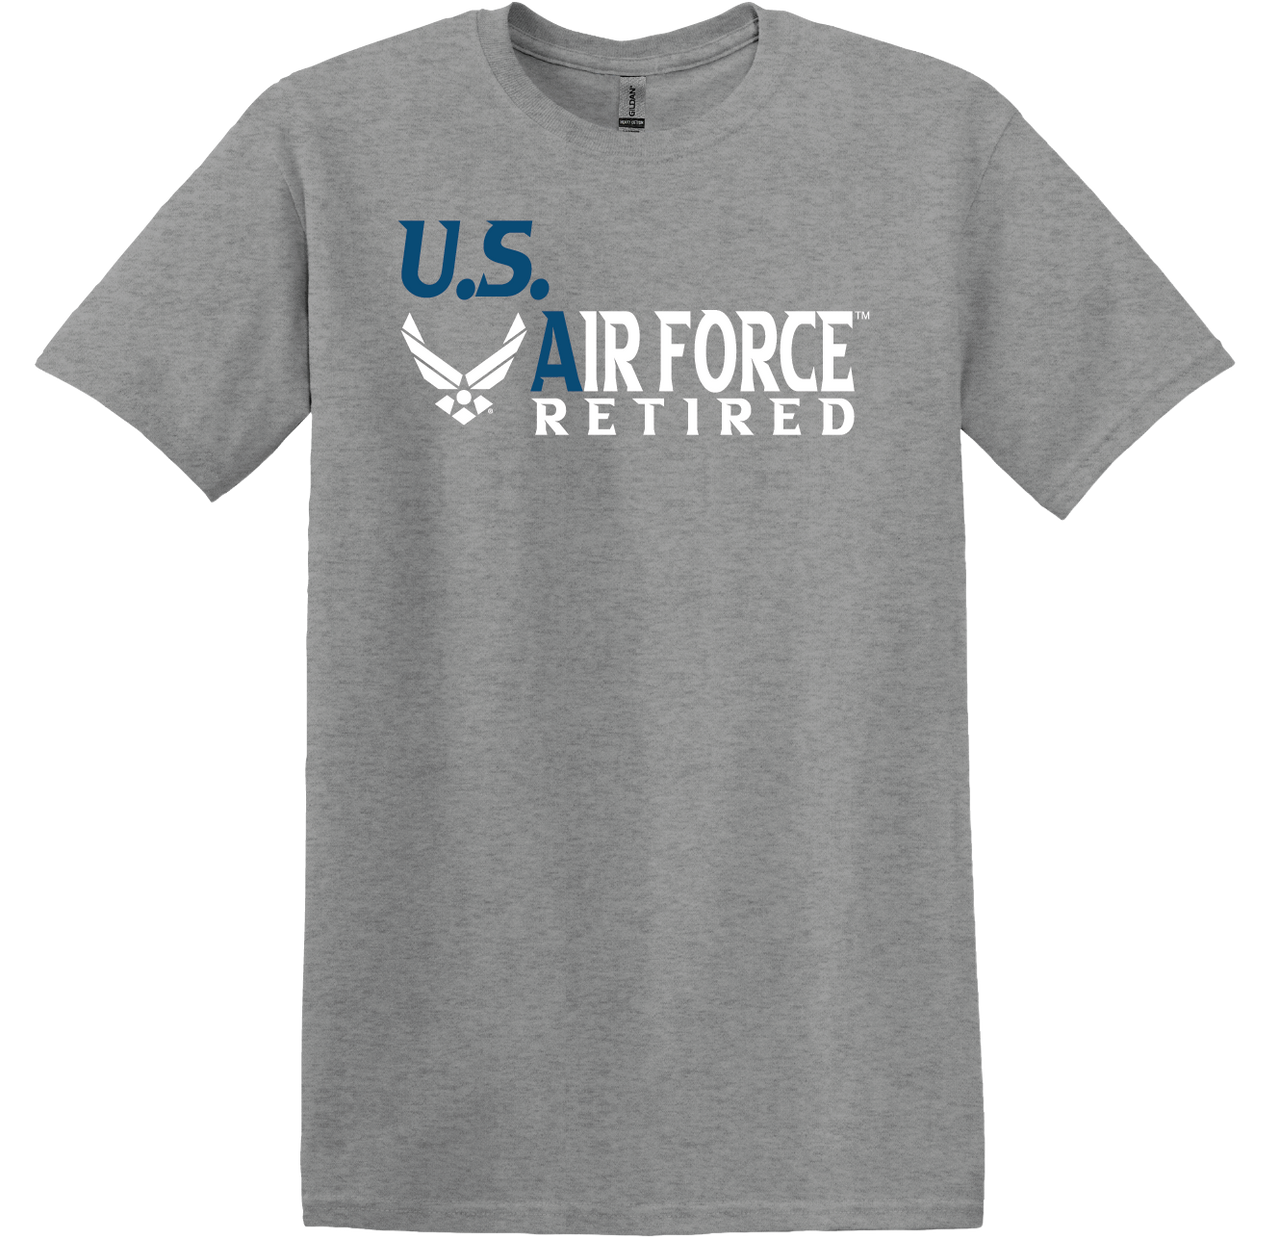 U.S. Air Force Retired with Symbol on Unisex Short Sleeve T-Shirt